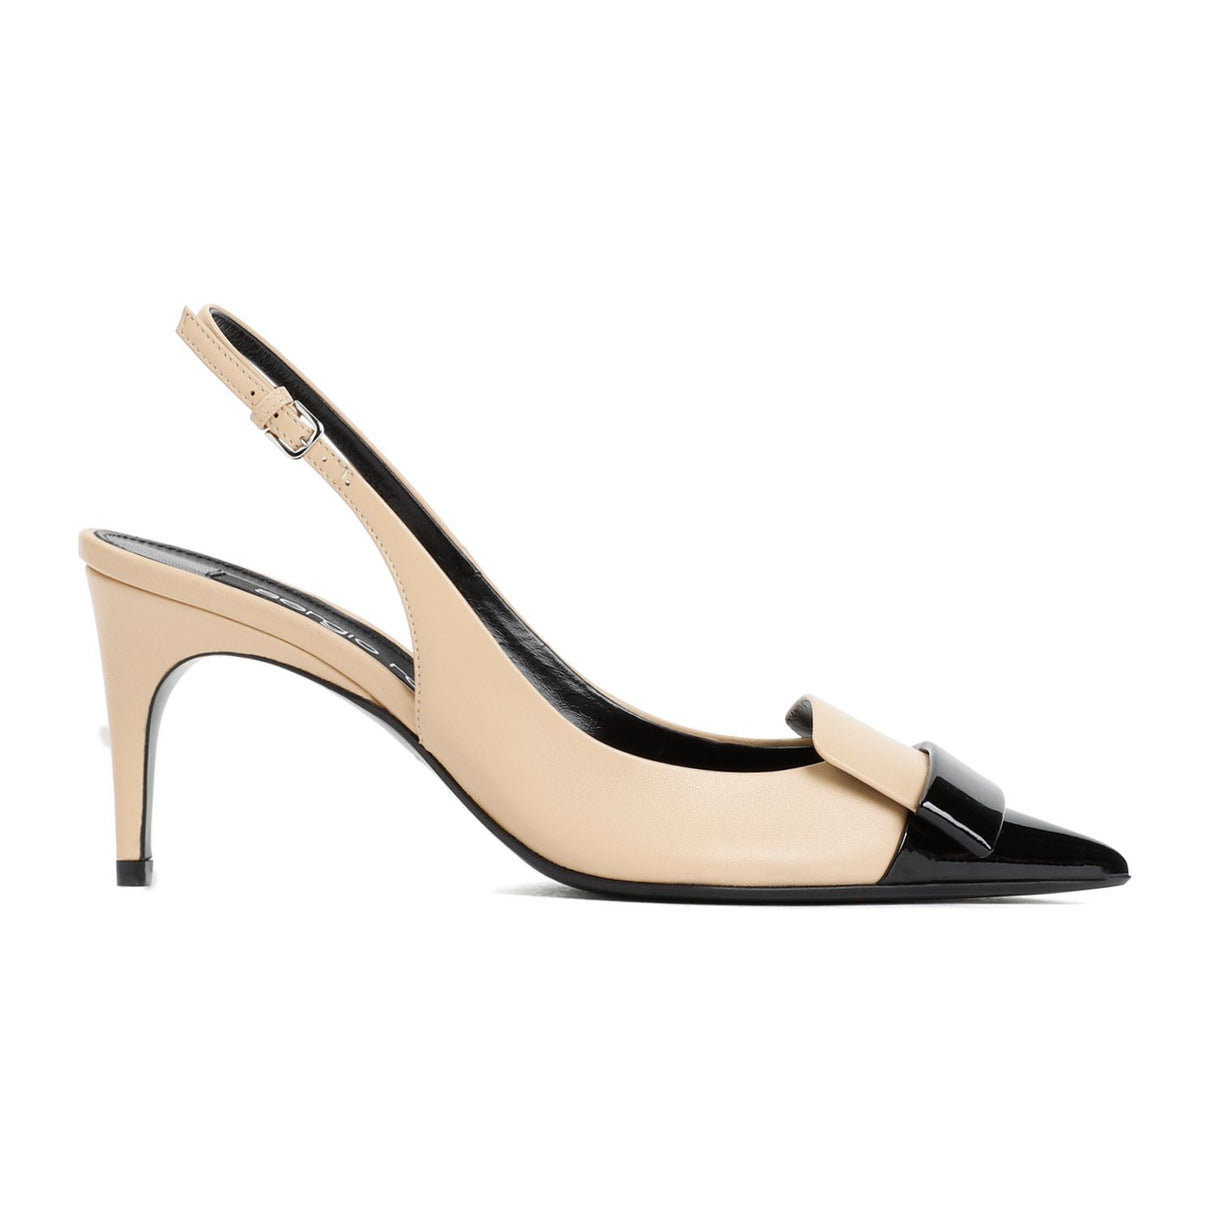 SERGIO ROSSI Nude Slingback Pumps for Women - 9cm Leather Heels